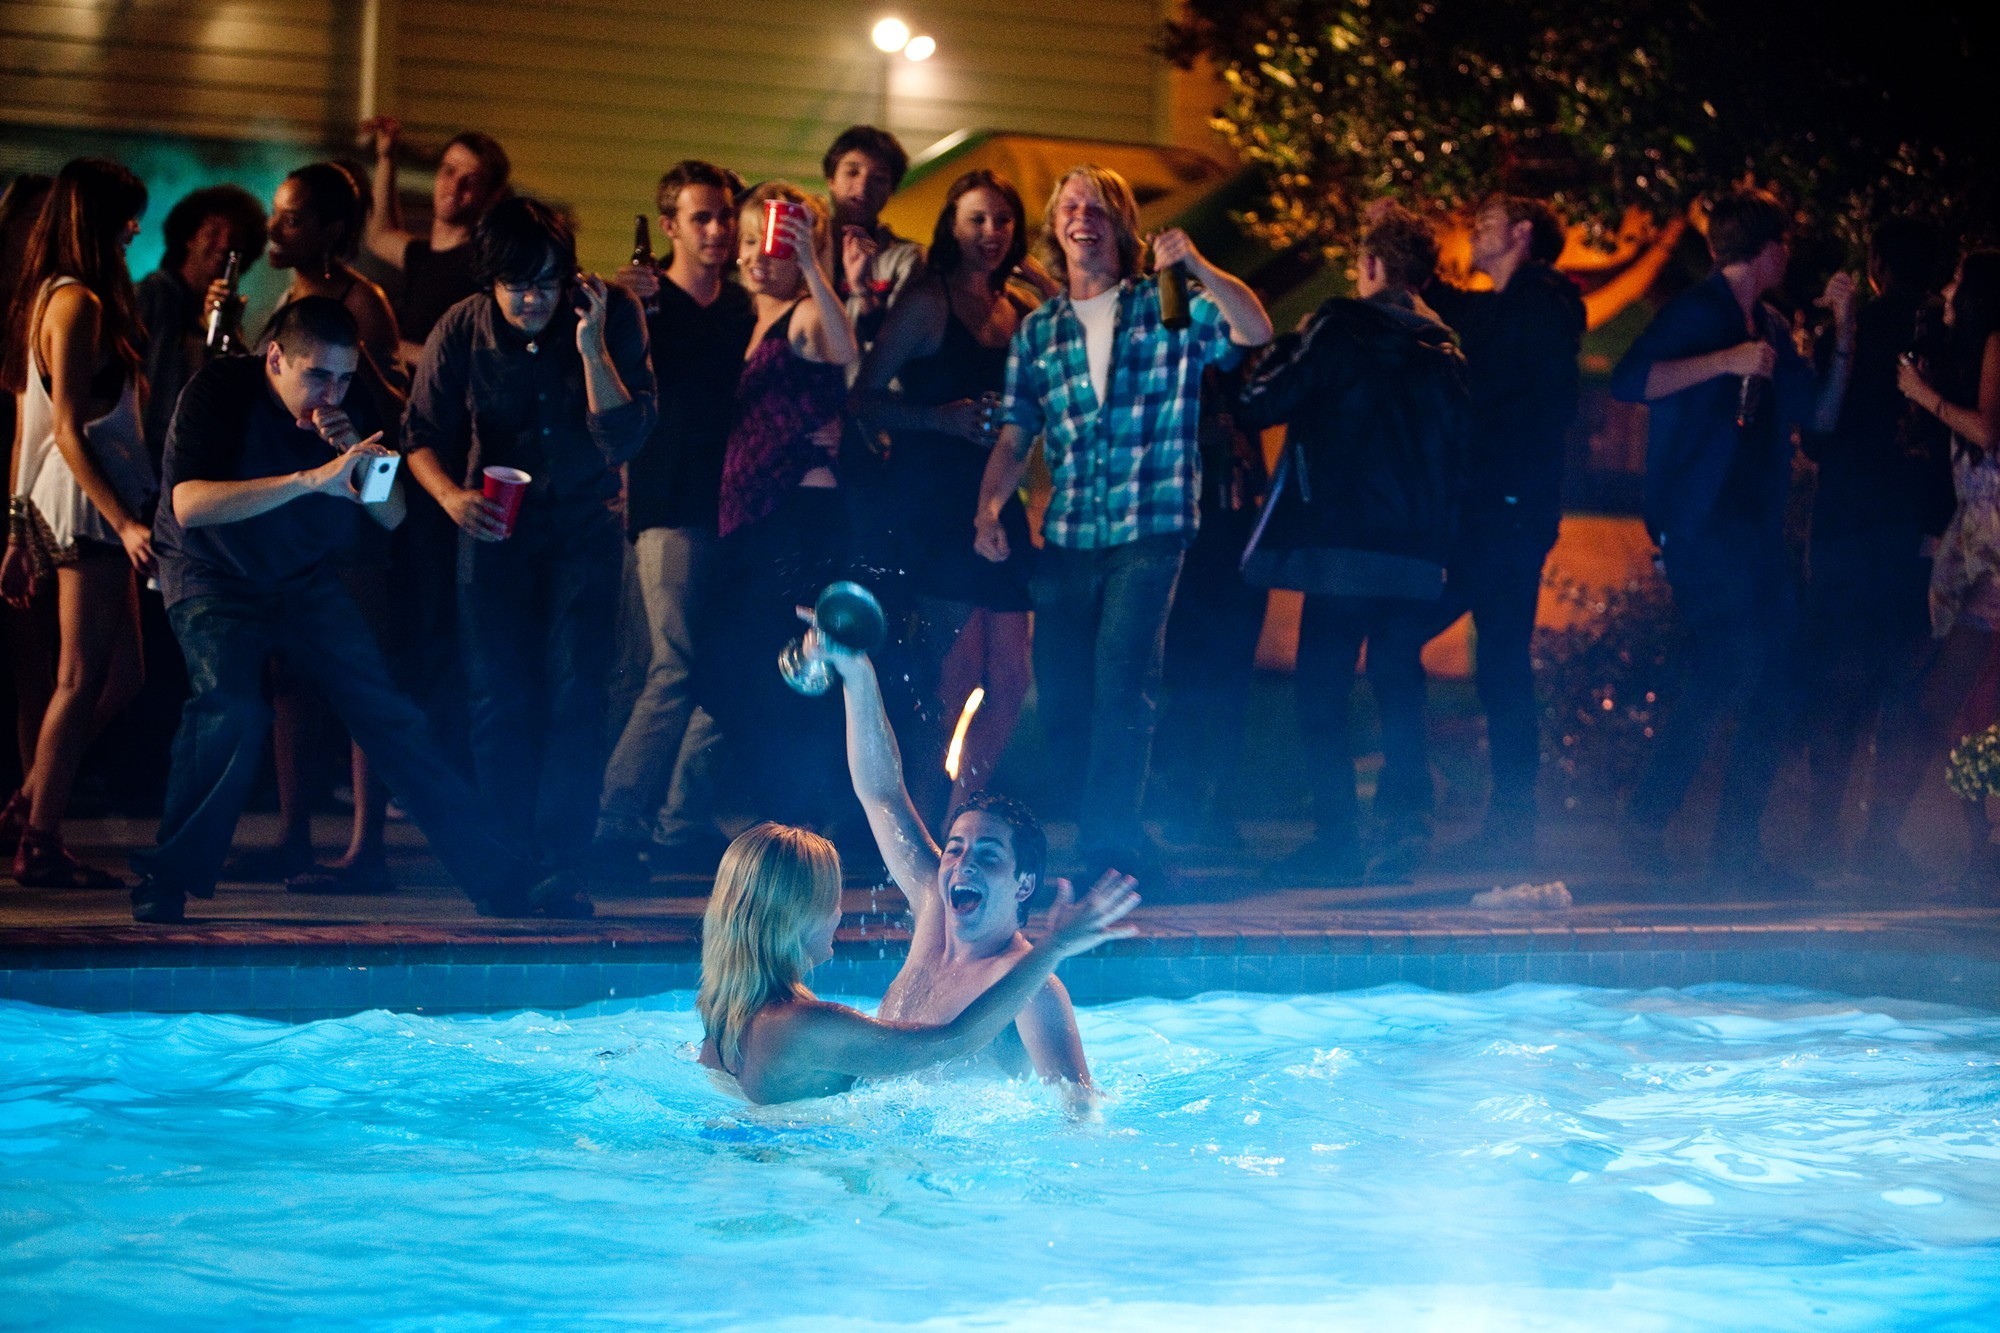 Oliver Cooper stars as Costa in Warner Bros. Pictures' Project X (2012)